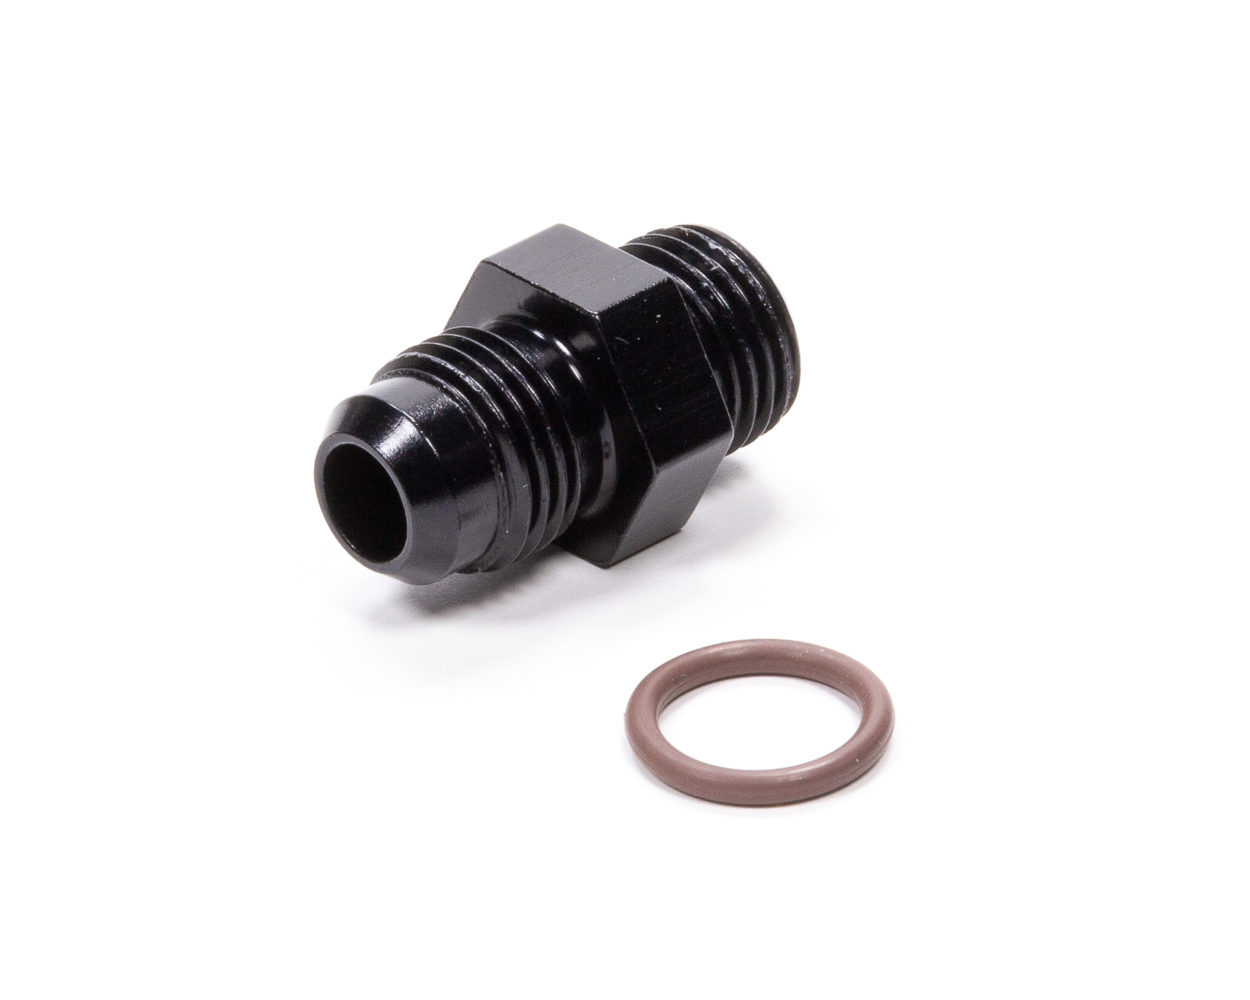 Fragola 495100-BL Fitting, Adapter, Straight, 6 AN Male to 6 AN Male O-Ring, Aluminum, Black Anodized, Each